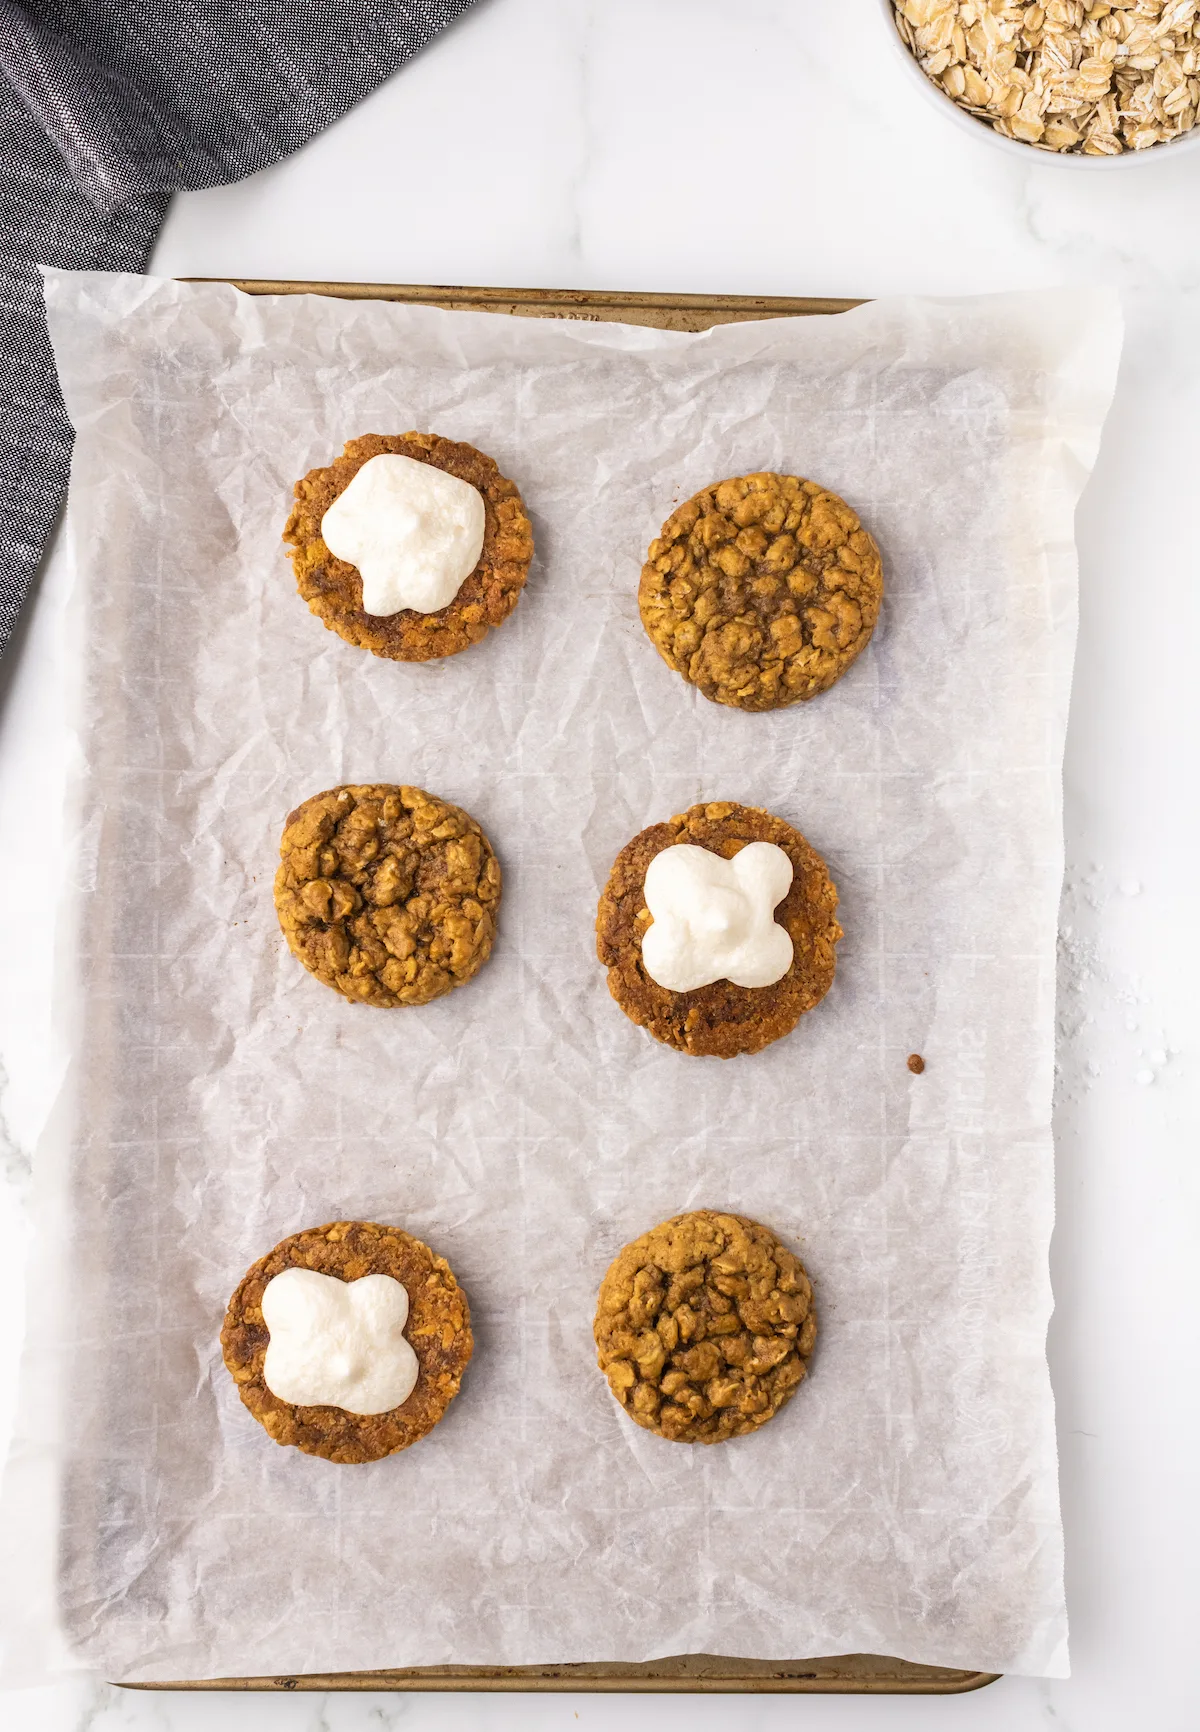 Cream filling on top of the oatmeal cookies